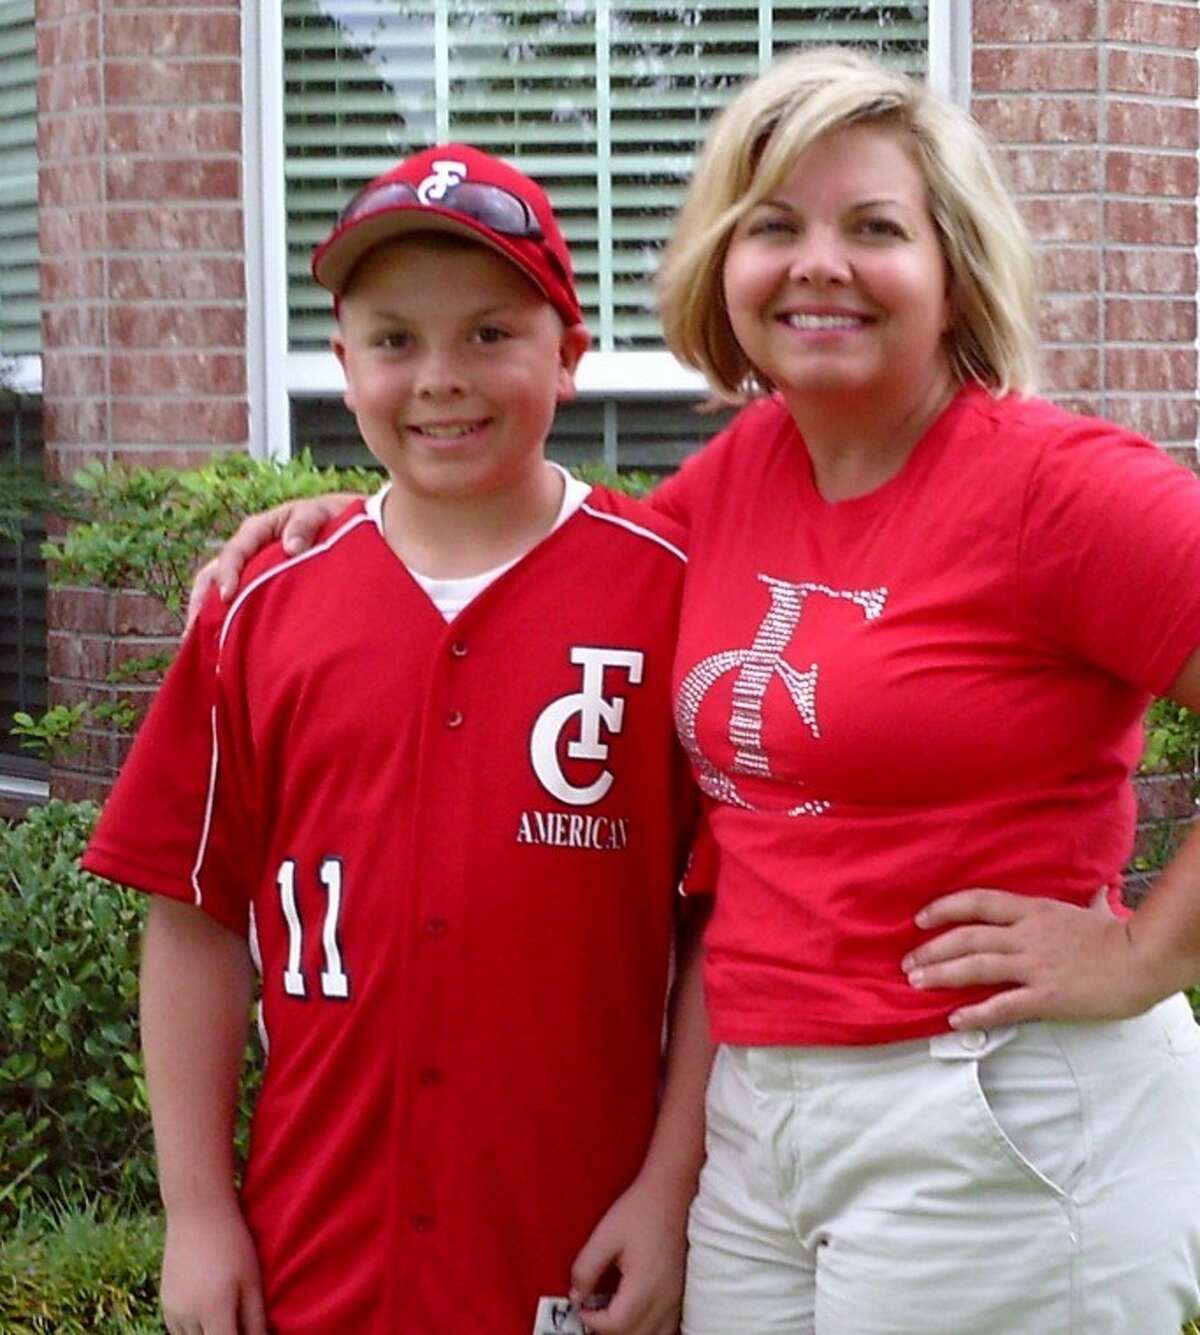 Nancy Hicks missed all but one of her son Payton's Little League games last year because she had cancer. Now cancer-free, Nancy has taken in every swing. She'll watch Payton play in the sectional tournament this week.